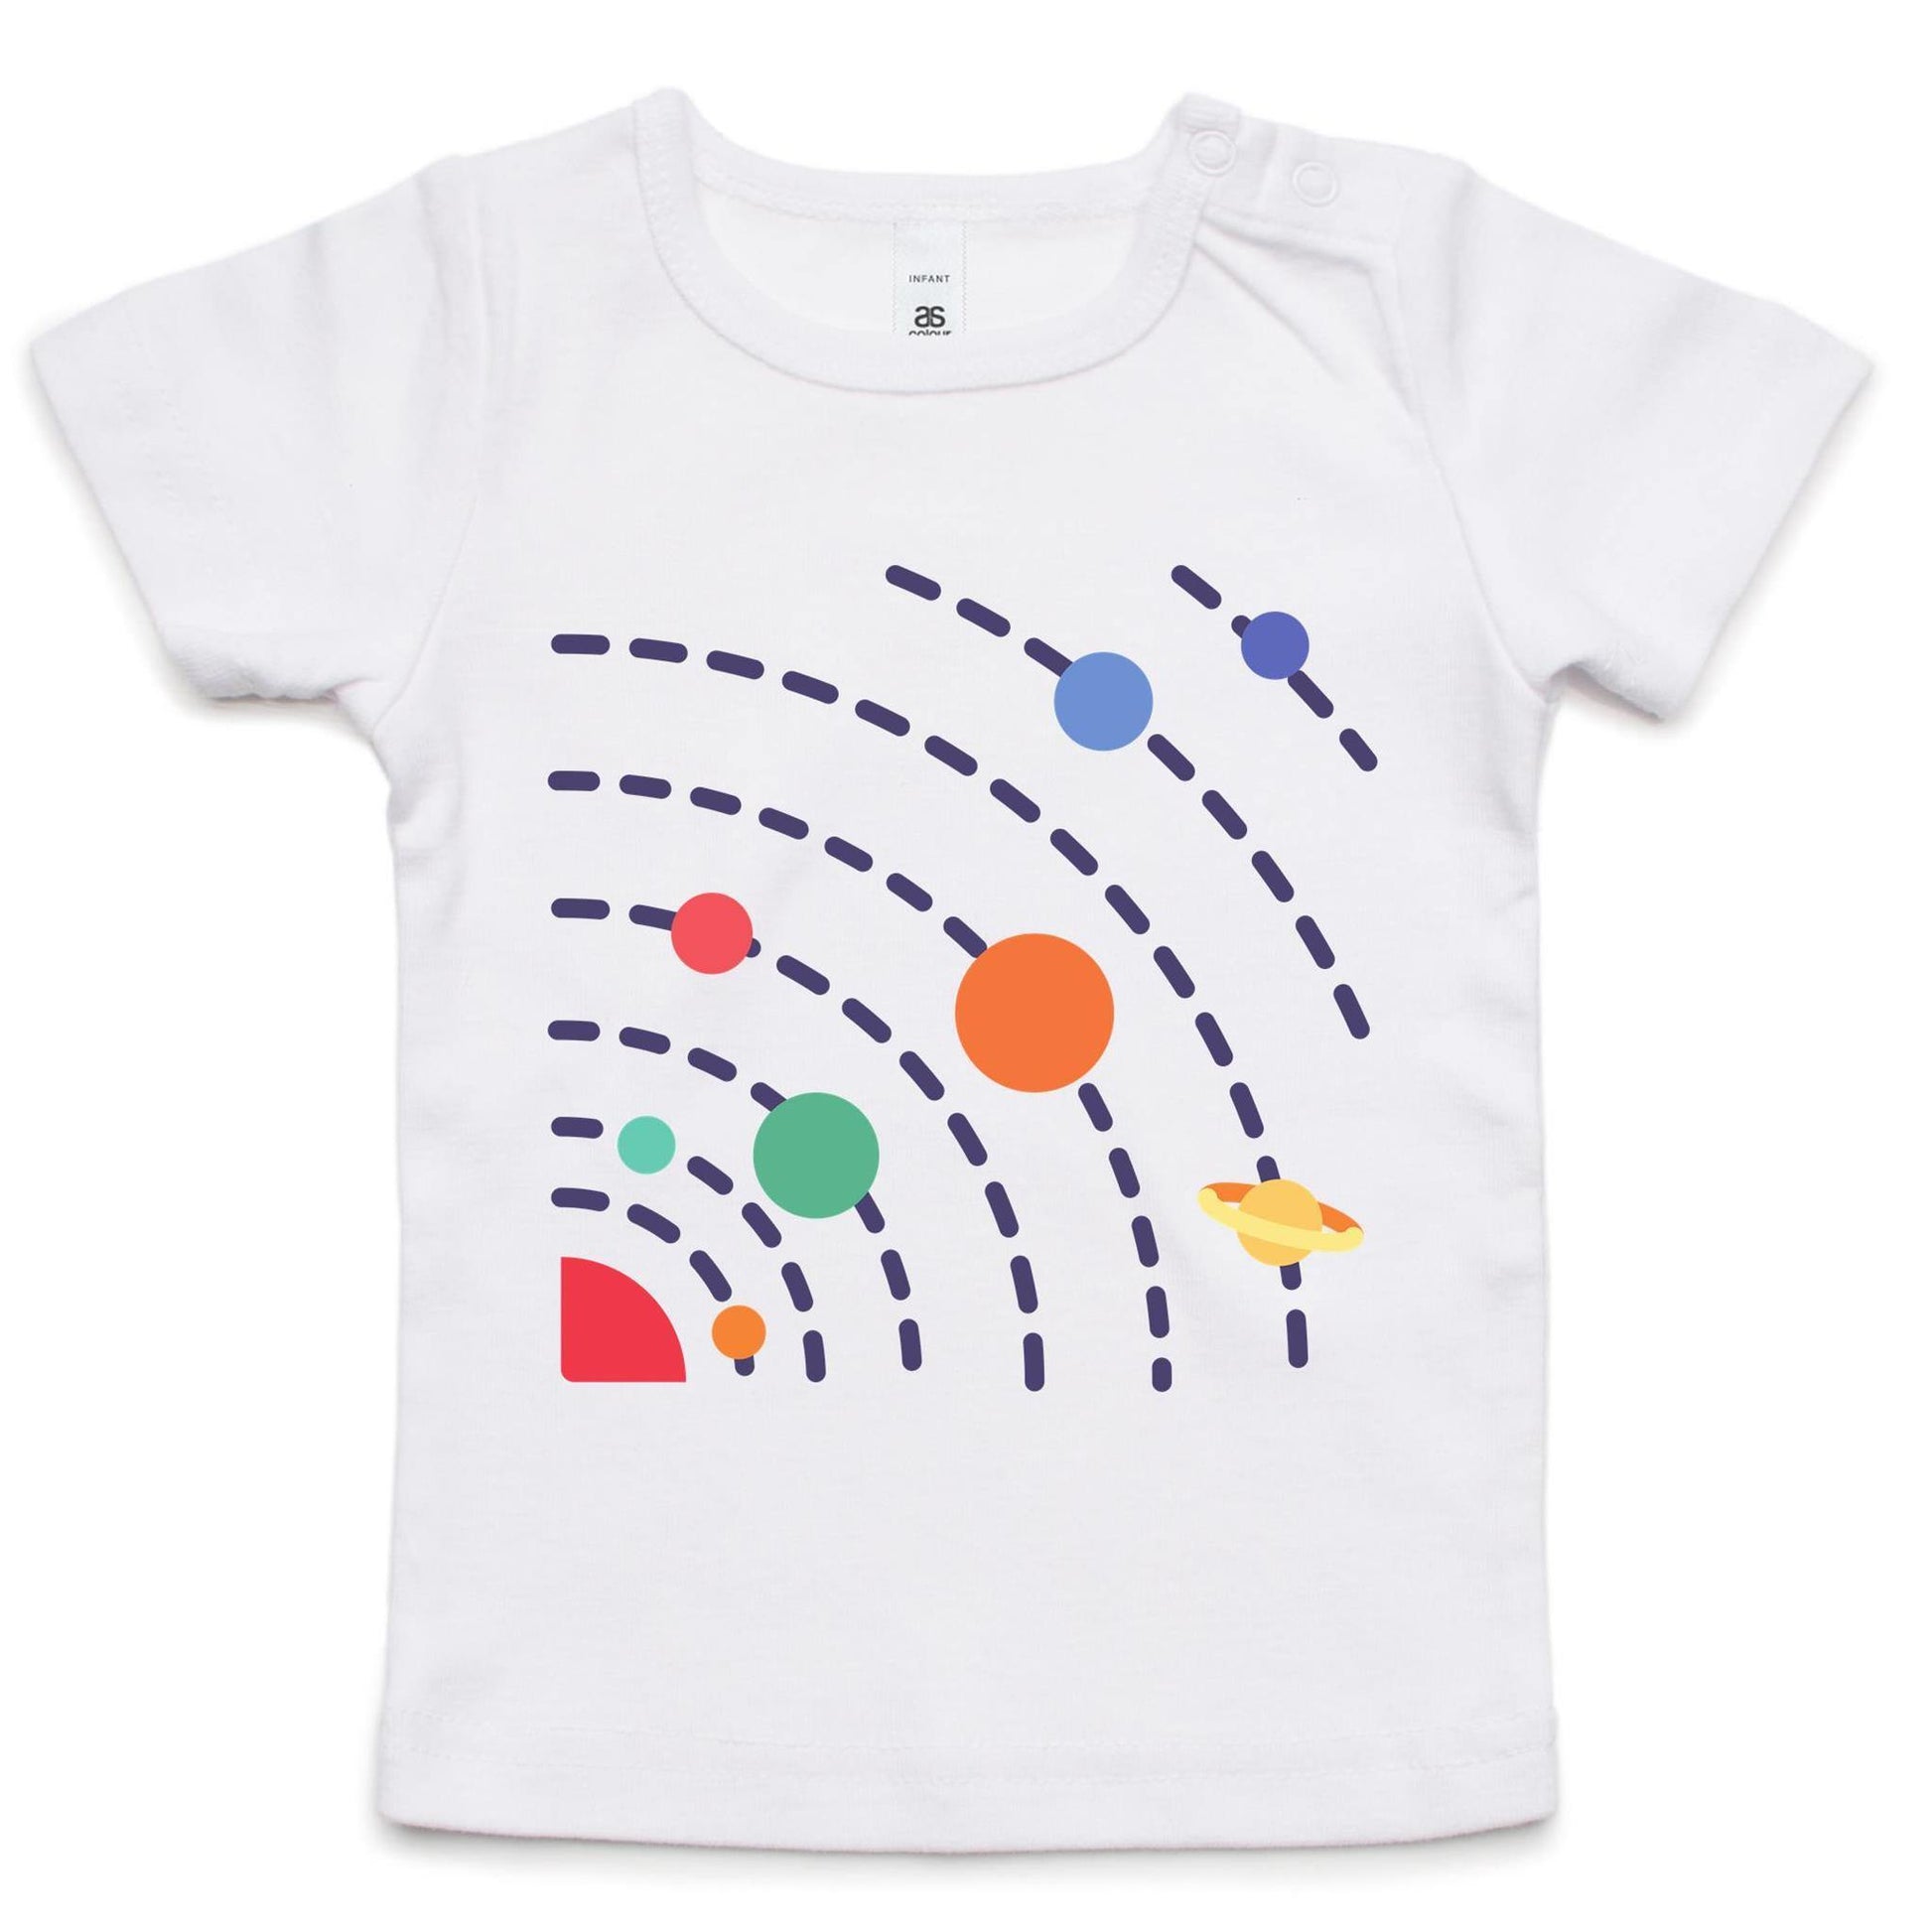 Solar System - Baby T-shirt White Baby T-shirt kids Space